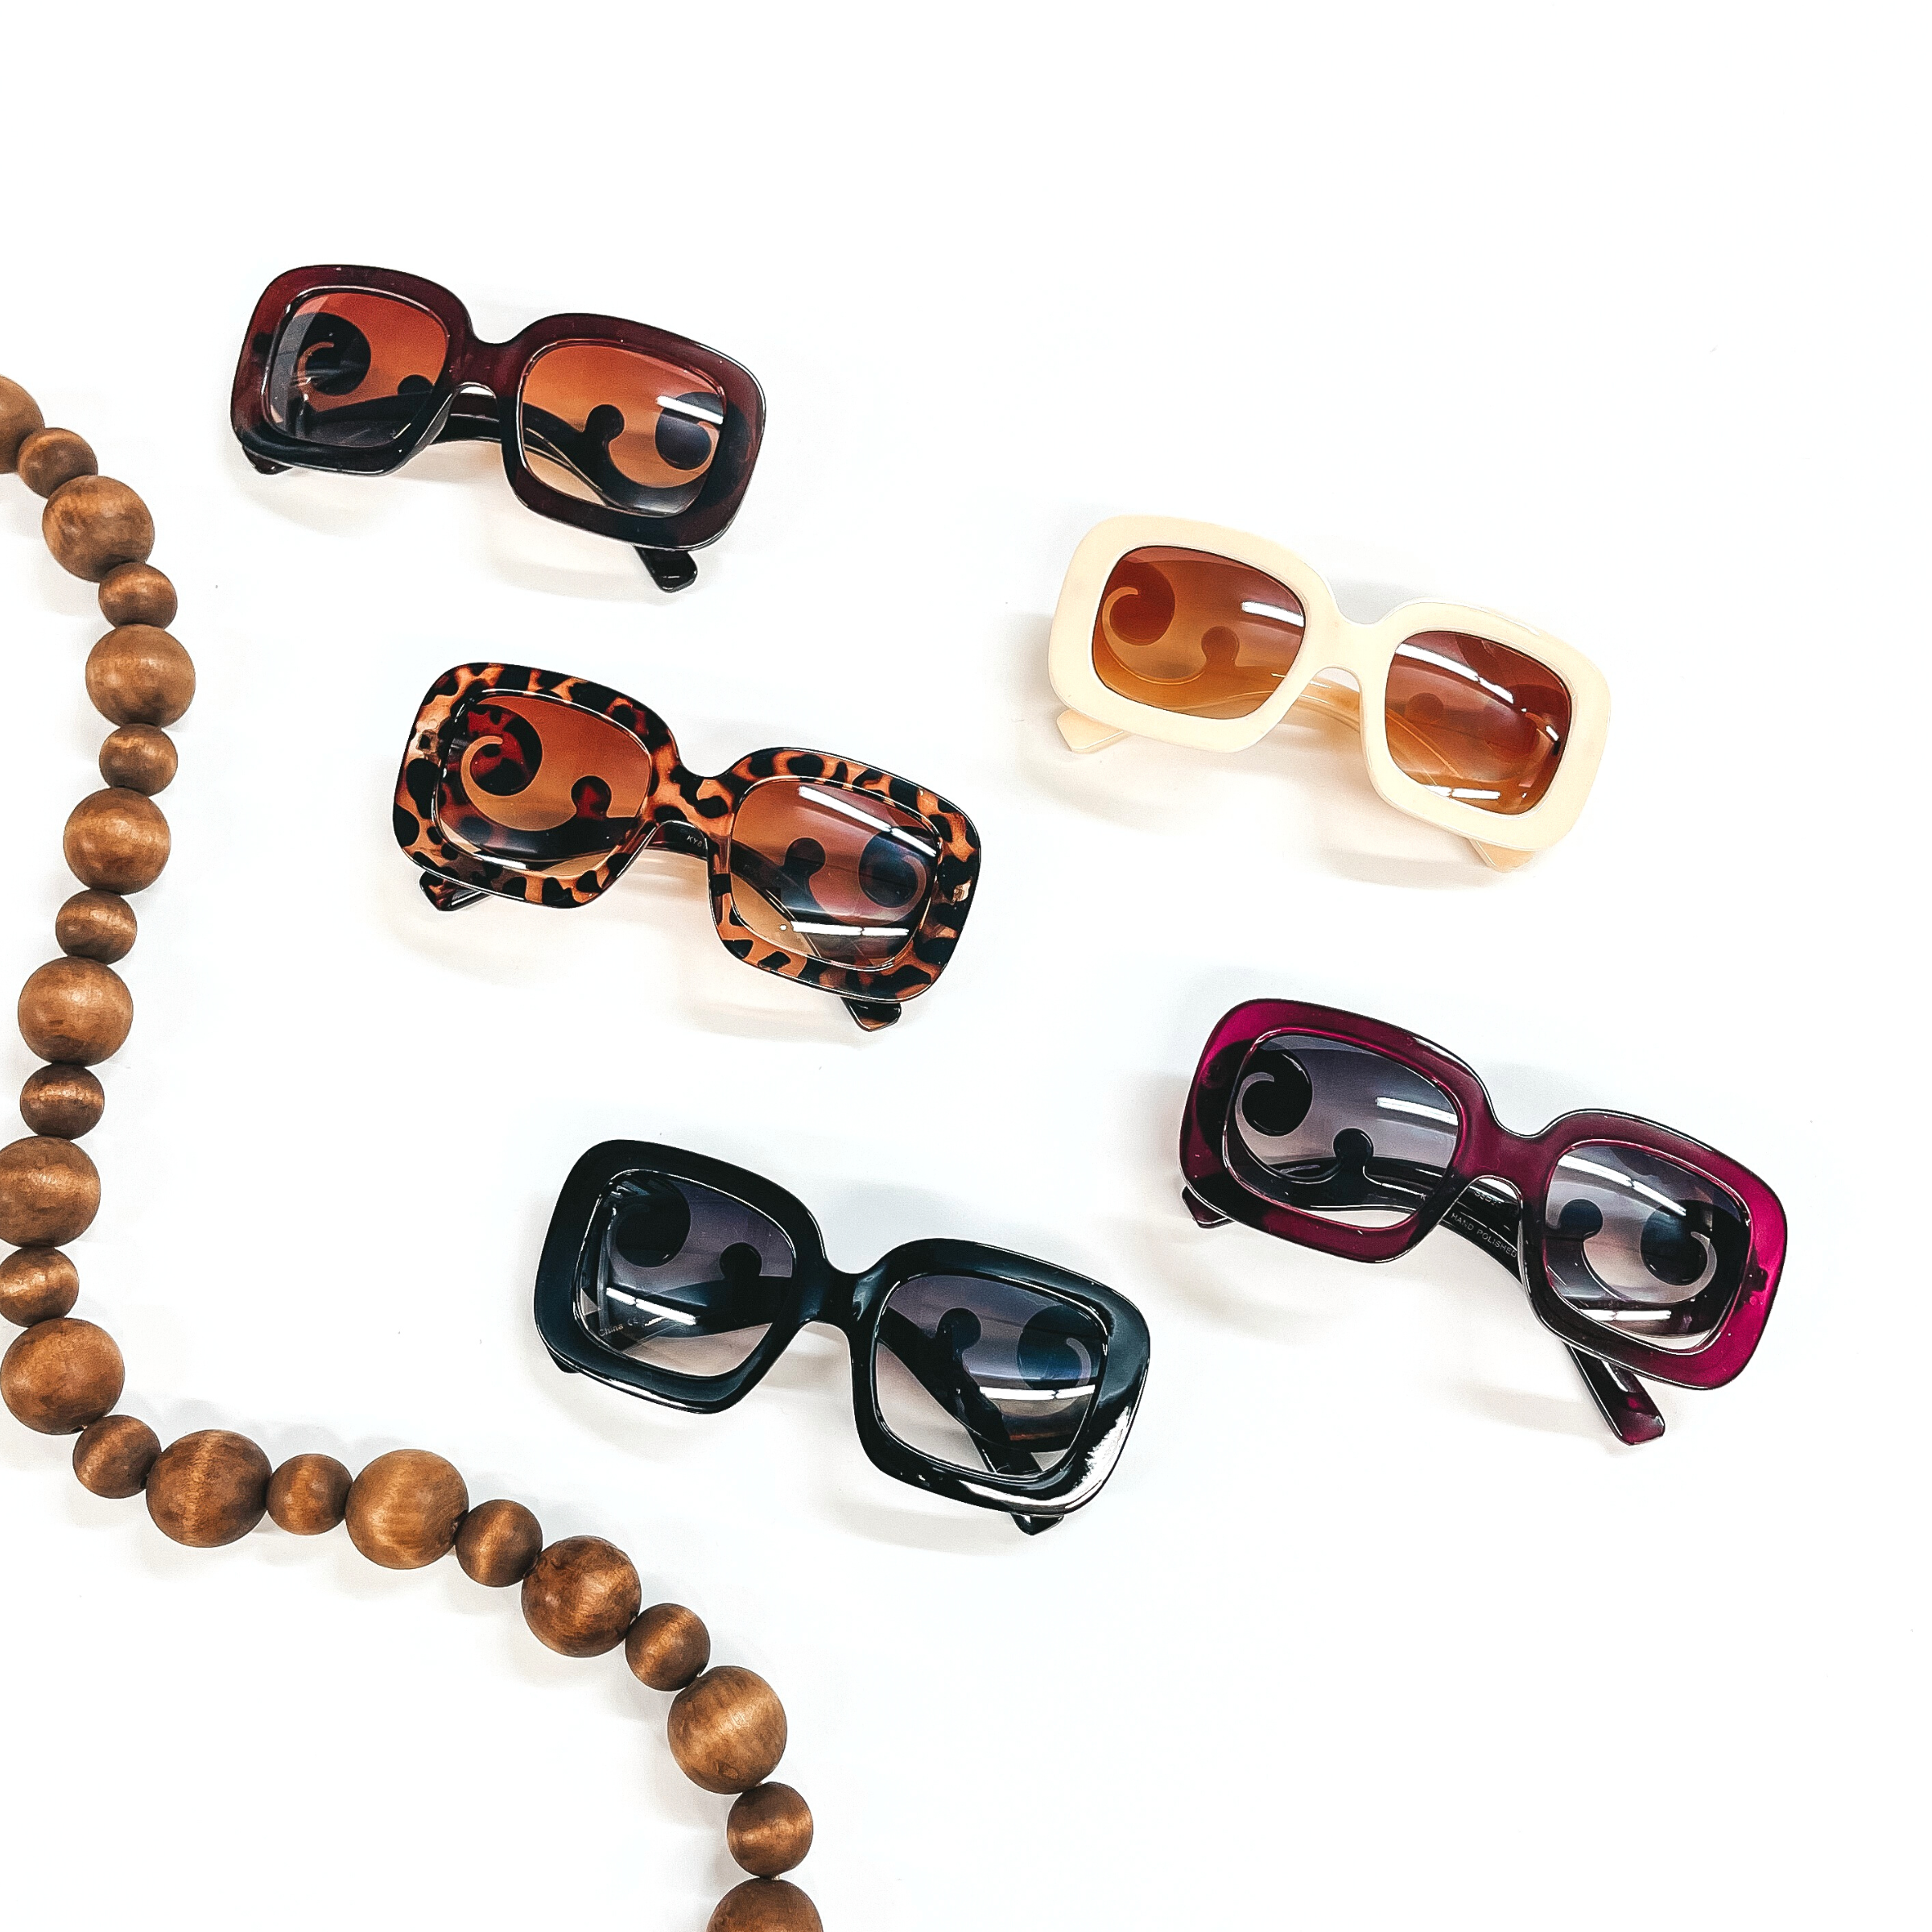 These are five pairs of large square rounded sunglasses in various colors and prints. There is brown, cream, tortuoise print, purple, and black. These sunglasses are  taken on a white background with brown beads in the side as decor.